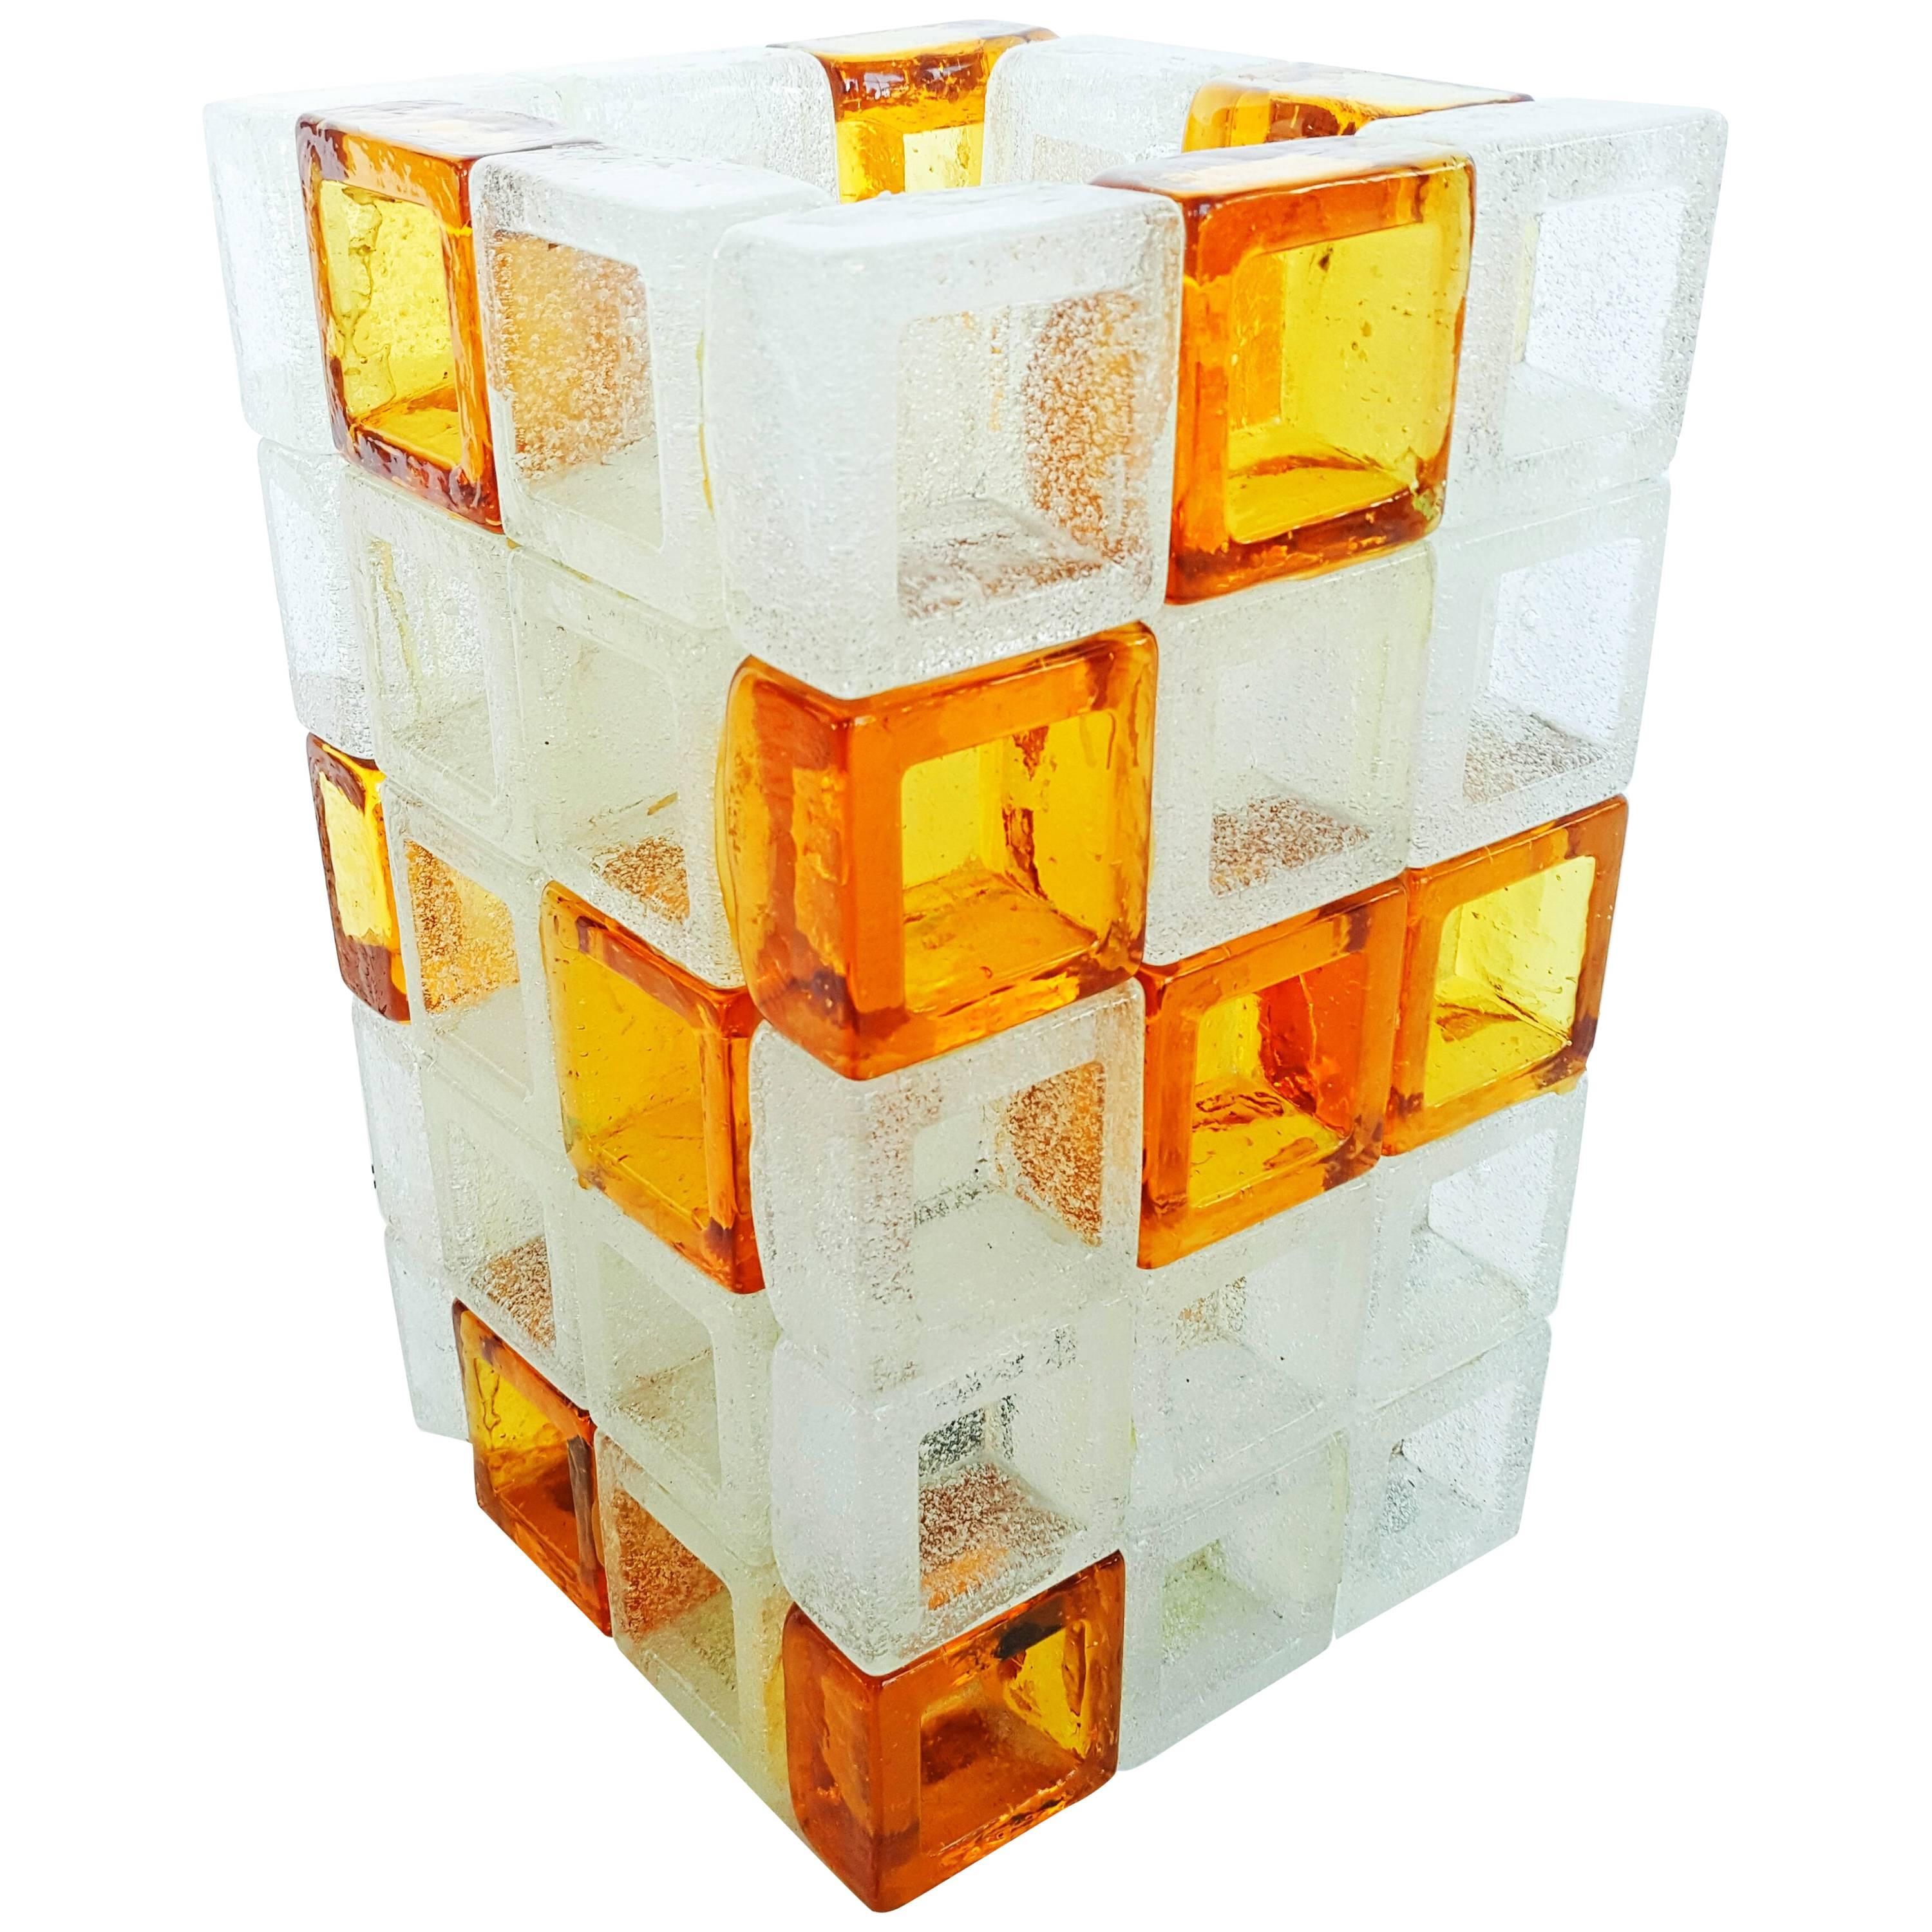 Albano Poli Table Lamp "Cube" for Poliarte, Italy, 1960s